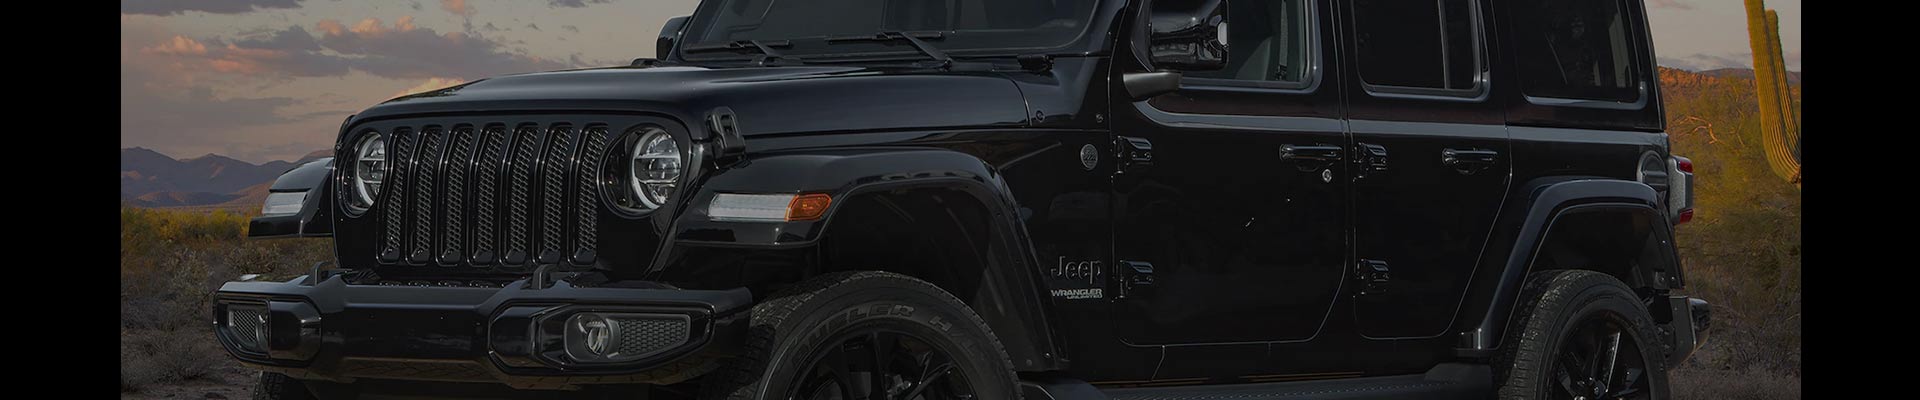 Shop Replacement and OEM 1990 Jeep Wrangler Parts with Discounted Price on the Net